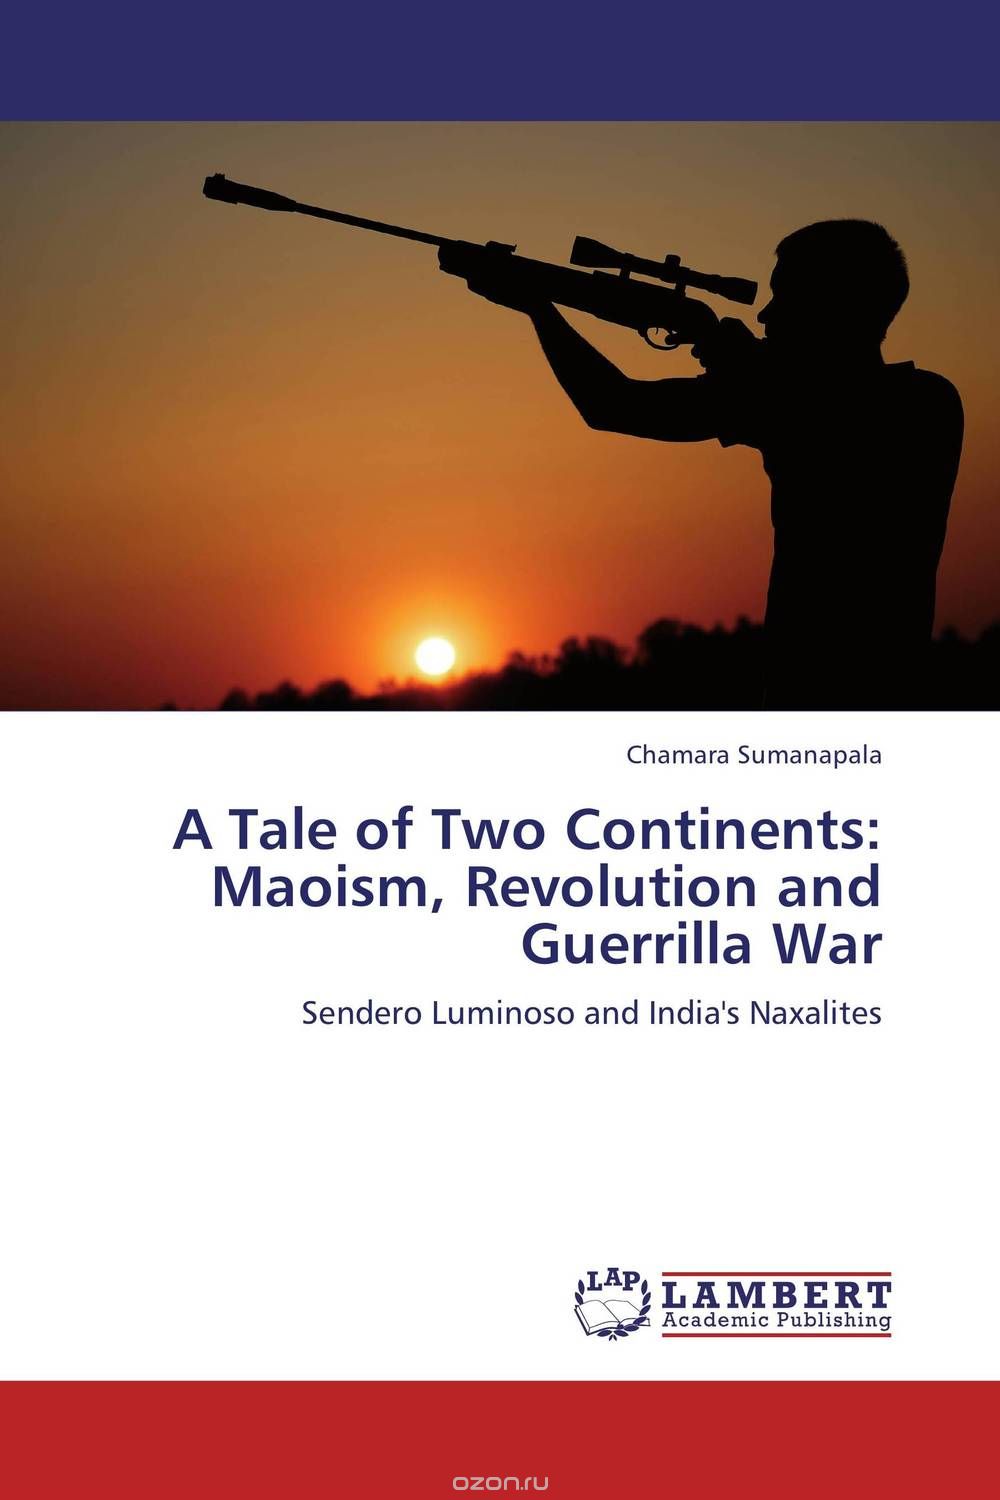 Скачать книгу "A Tale of Two Continents: Maoism, Revolution and Guerrilla War"